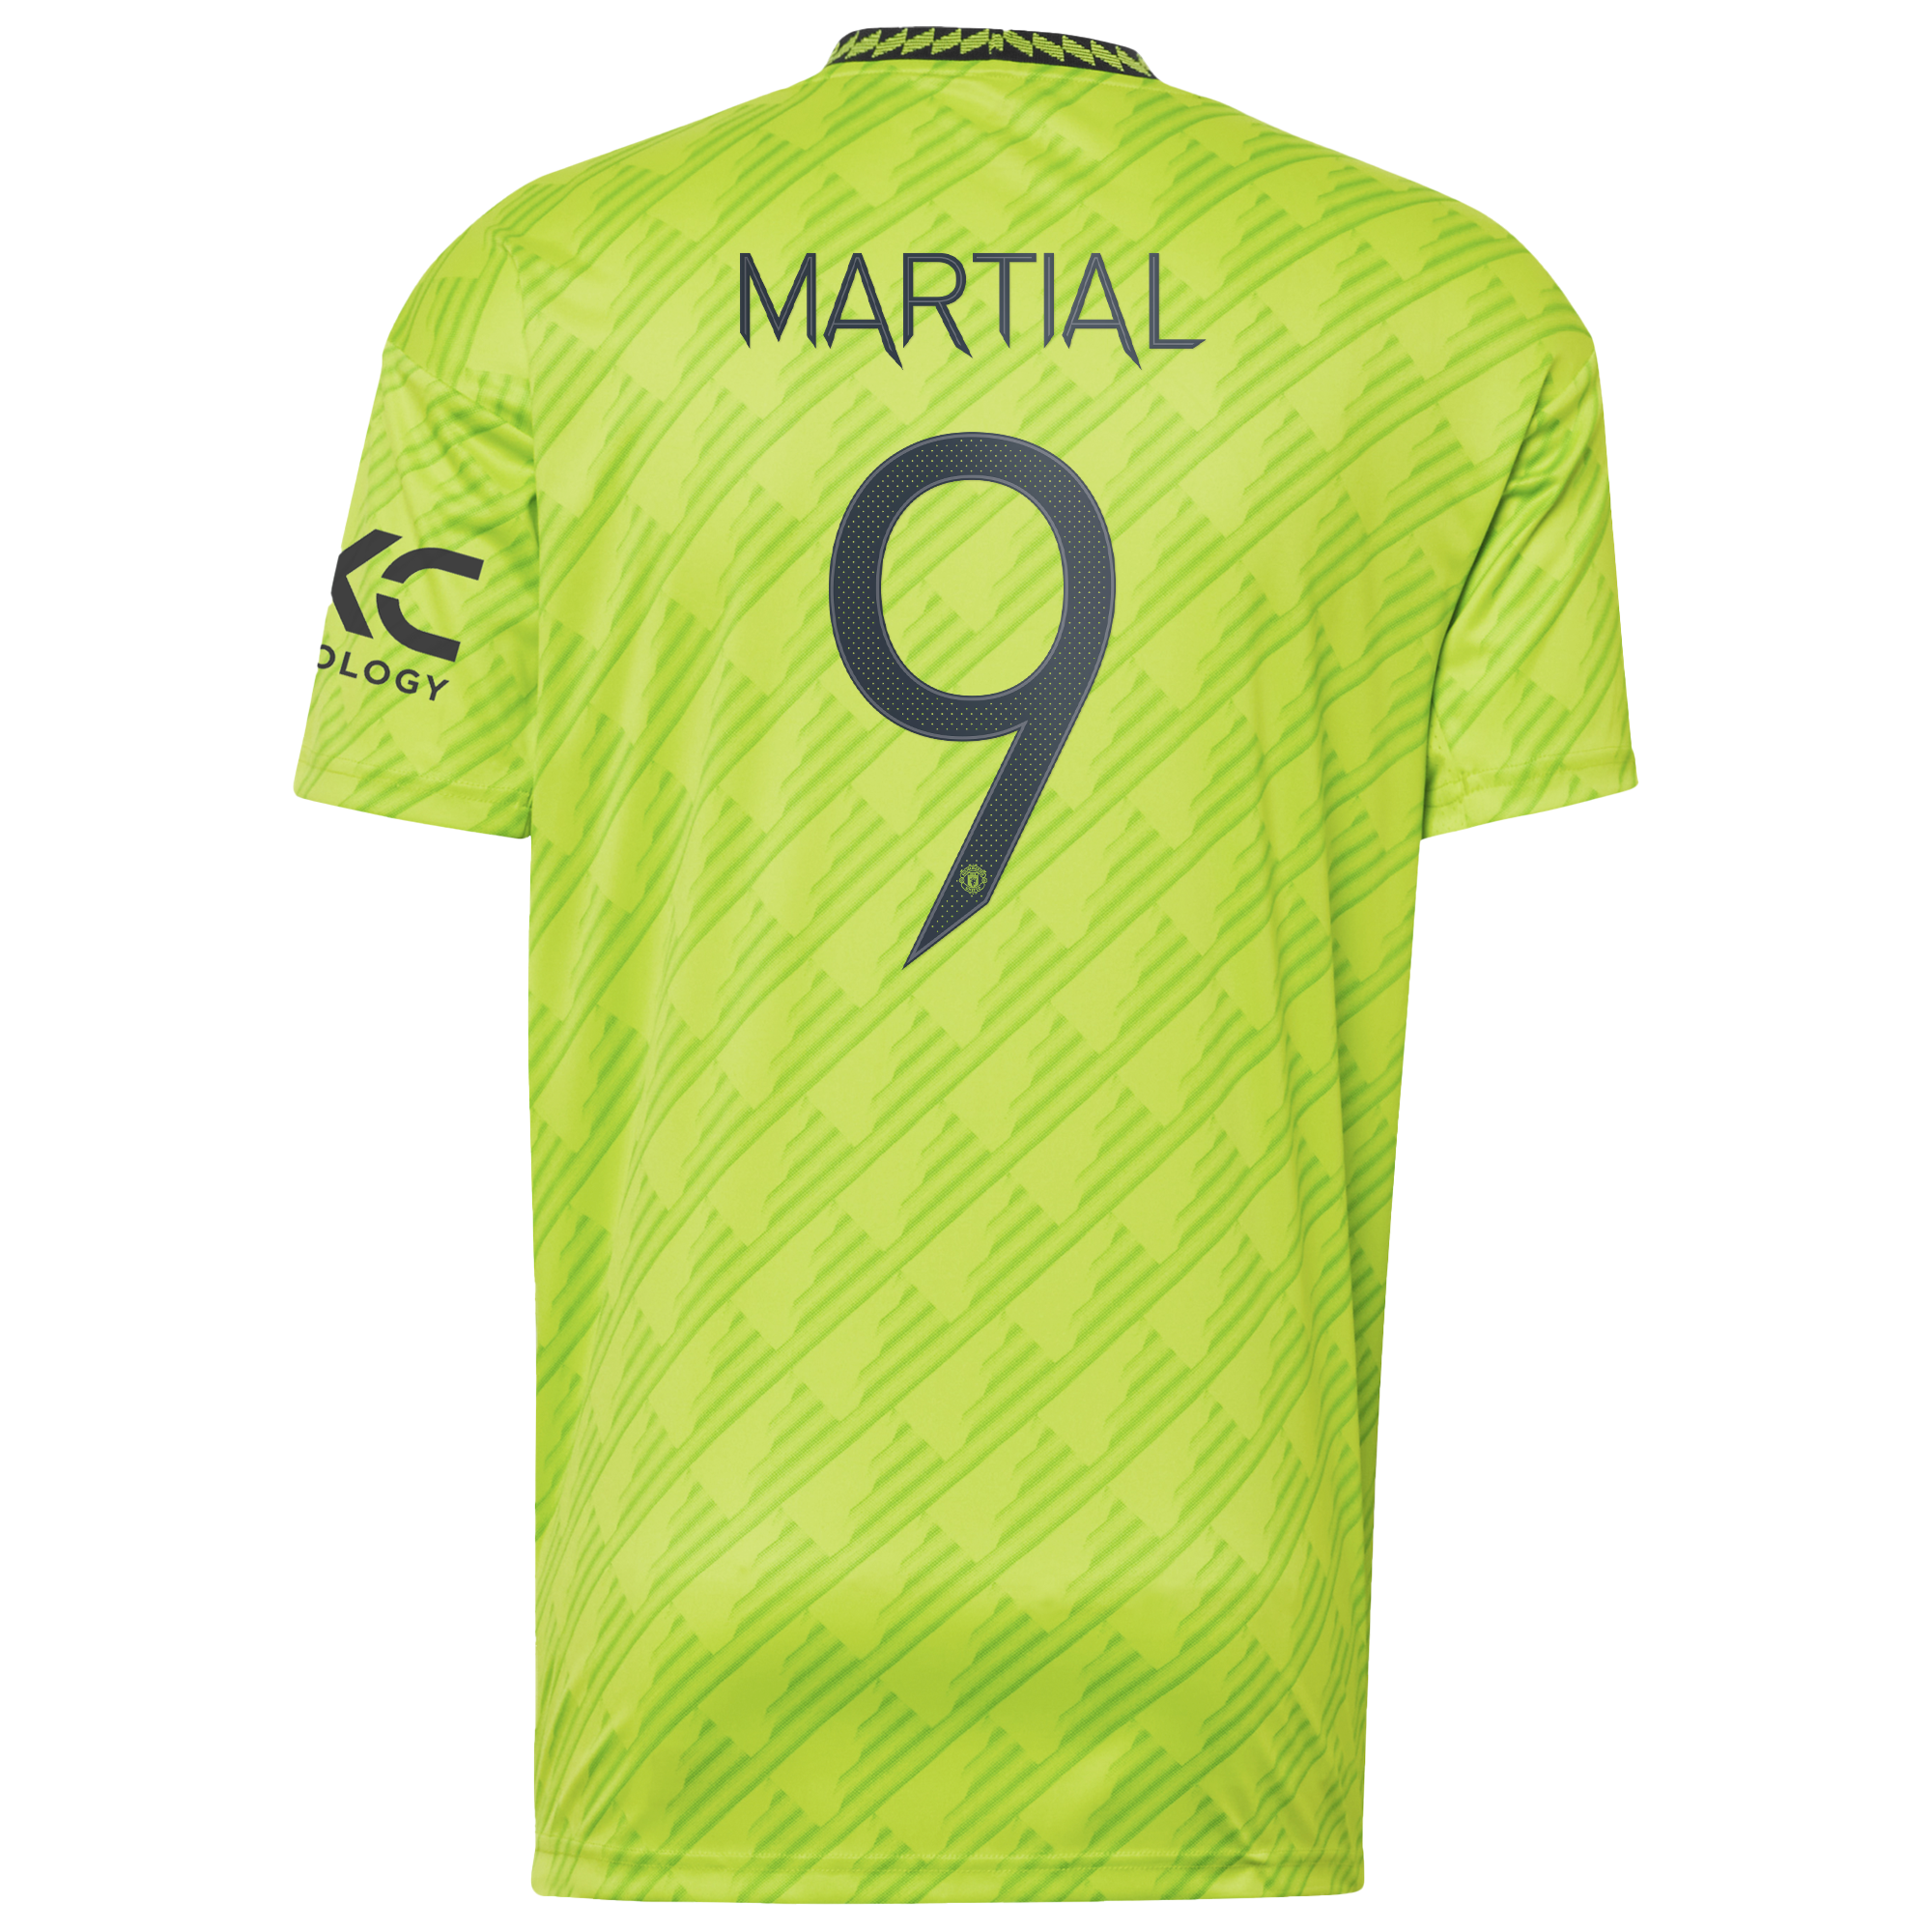 Manchester United Cup Third Shirt 2022-23 with Martial 9 printing